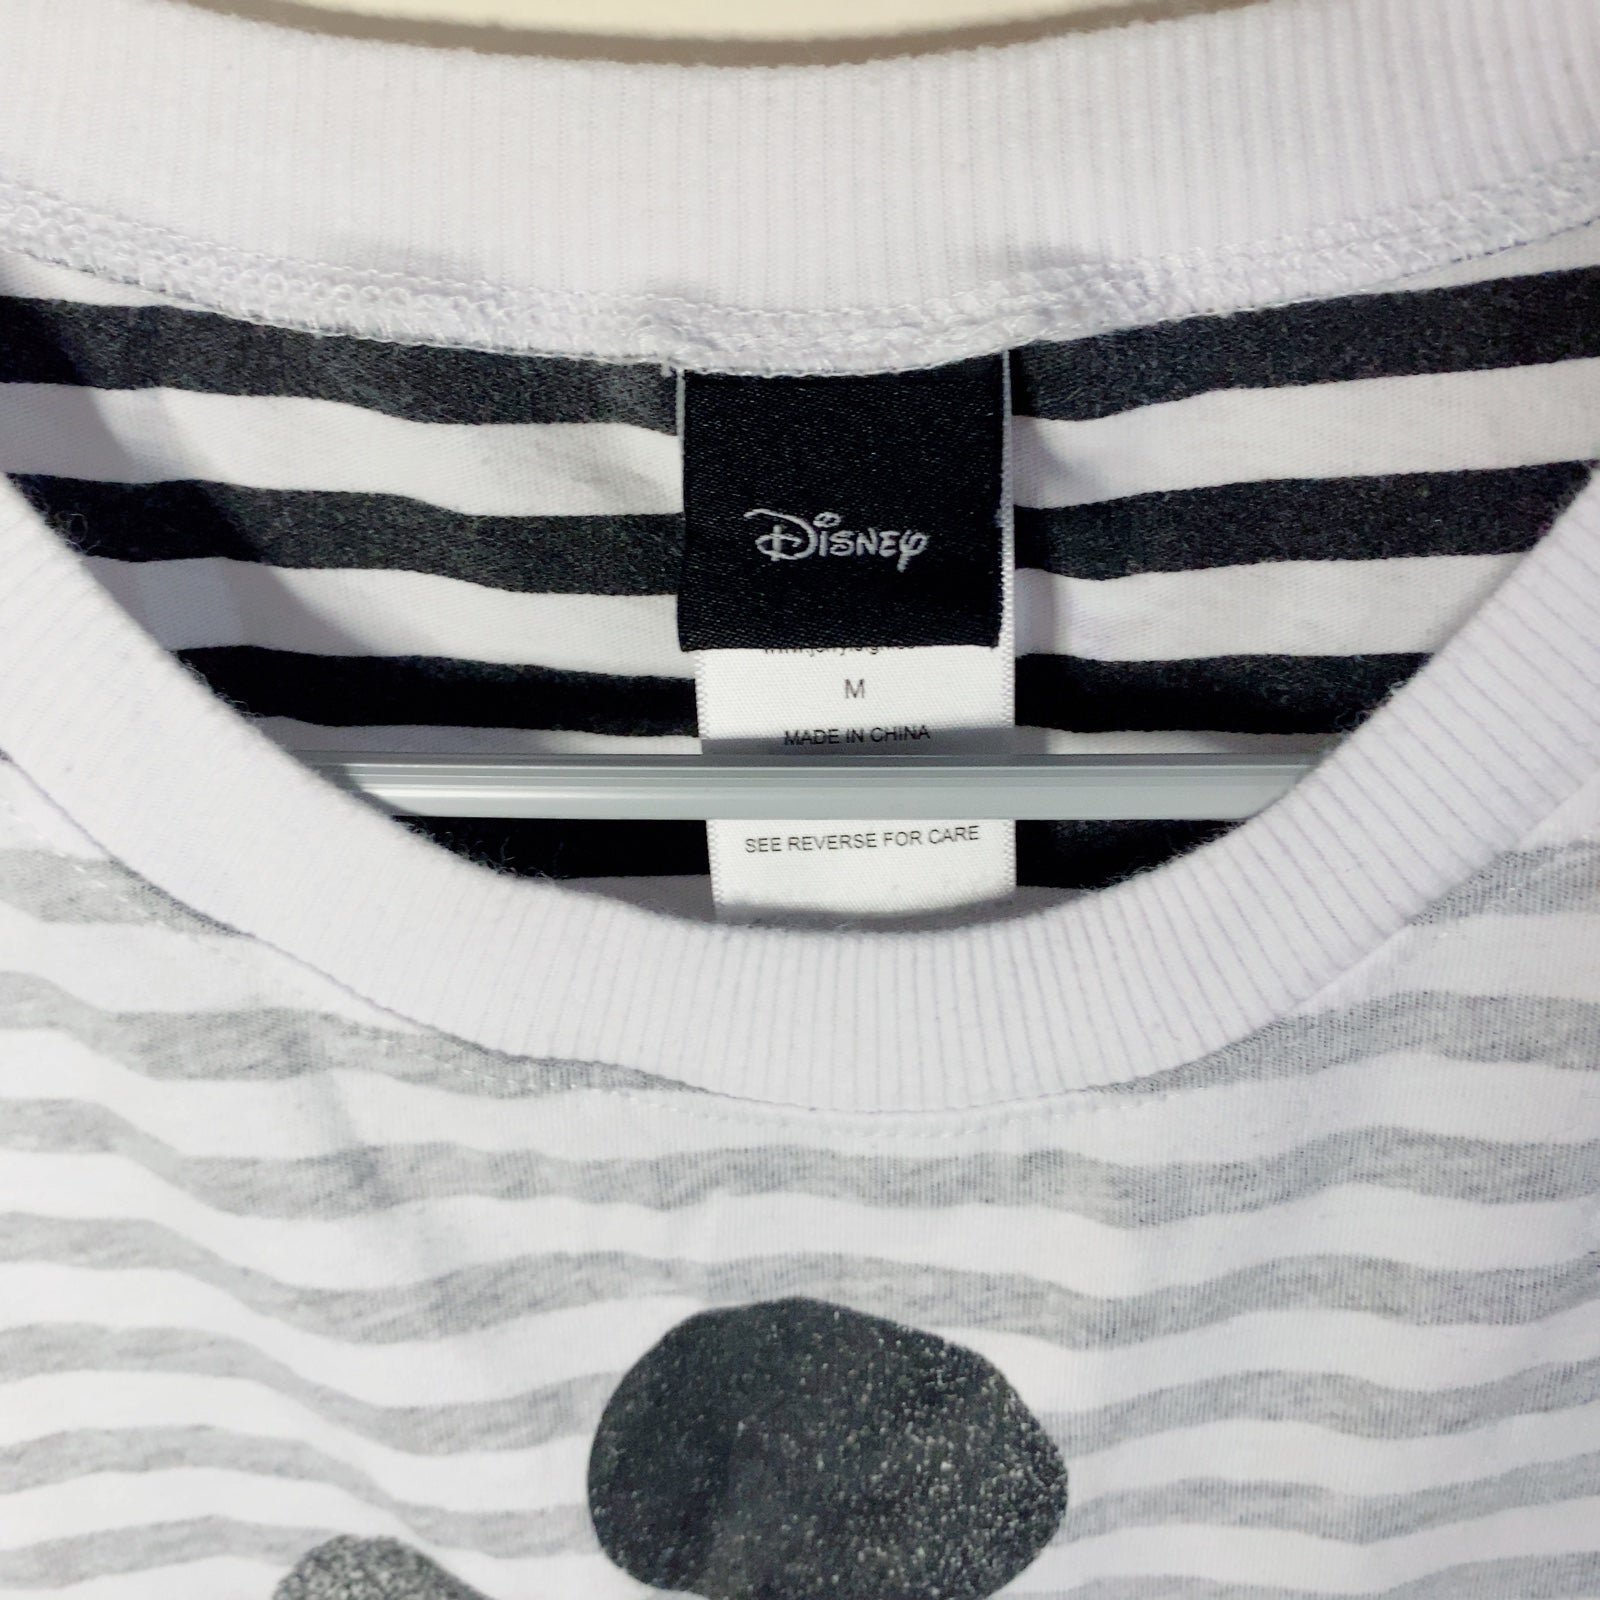 Nice Mickey Mouse shirt OkHdTtUbB Factory Price